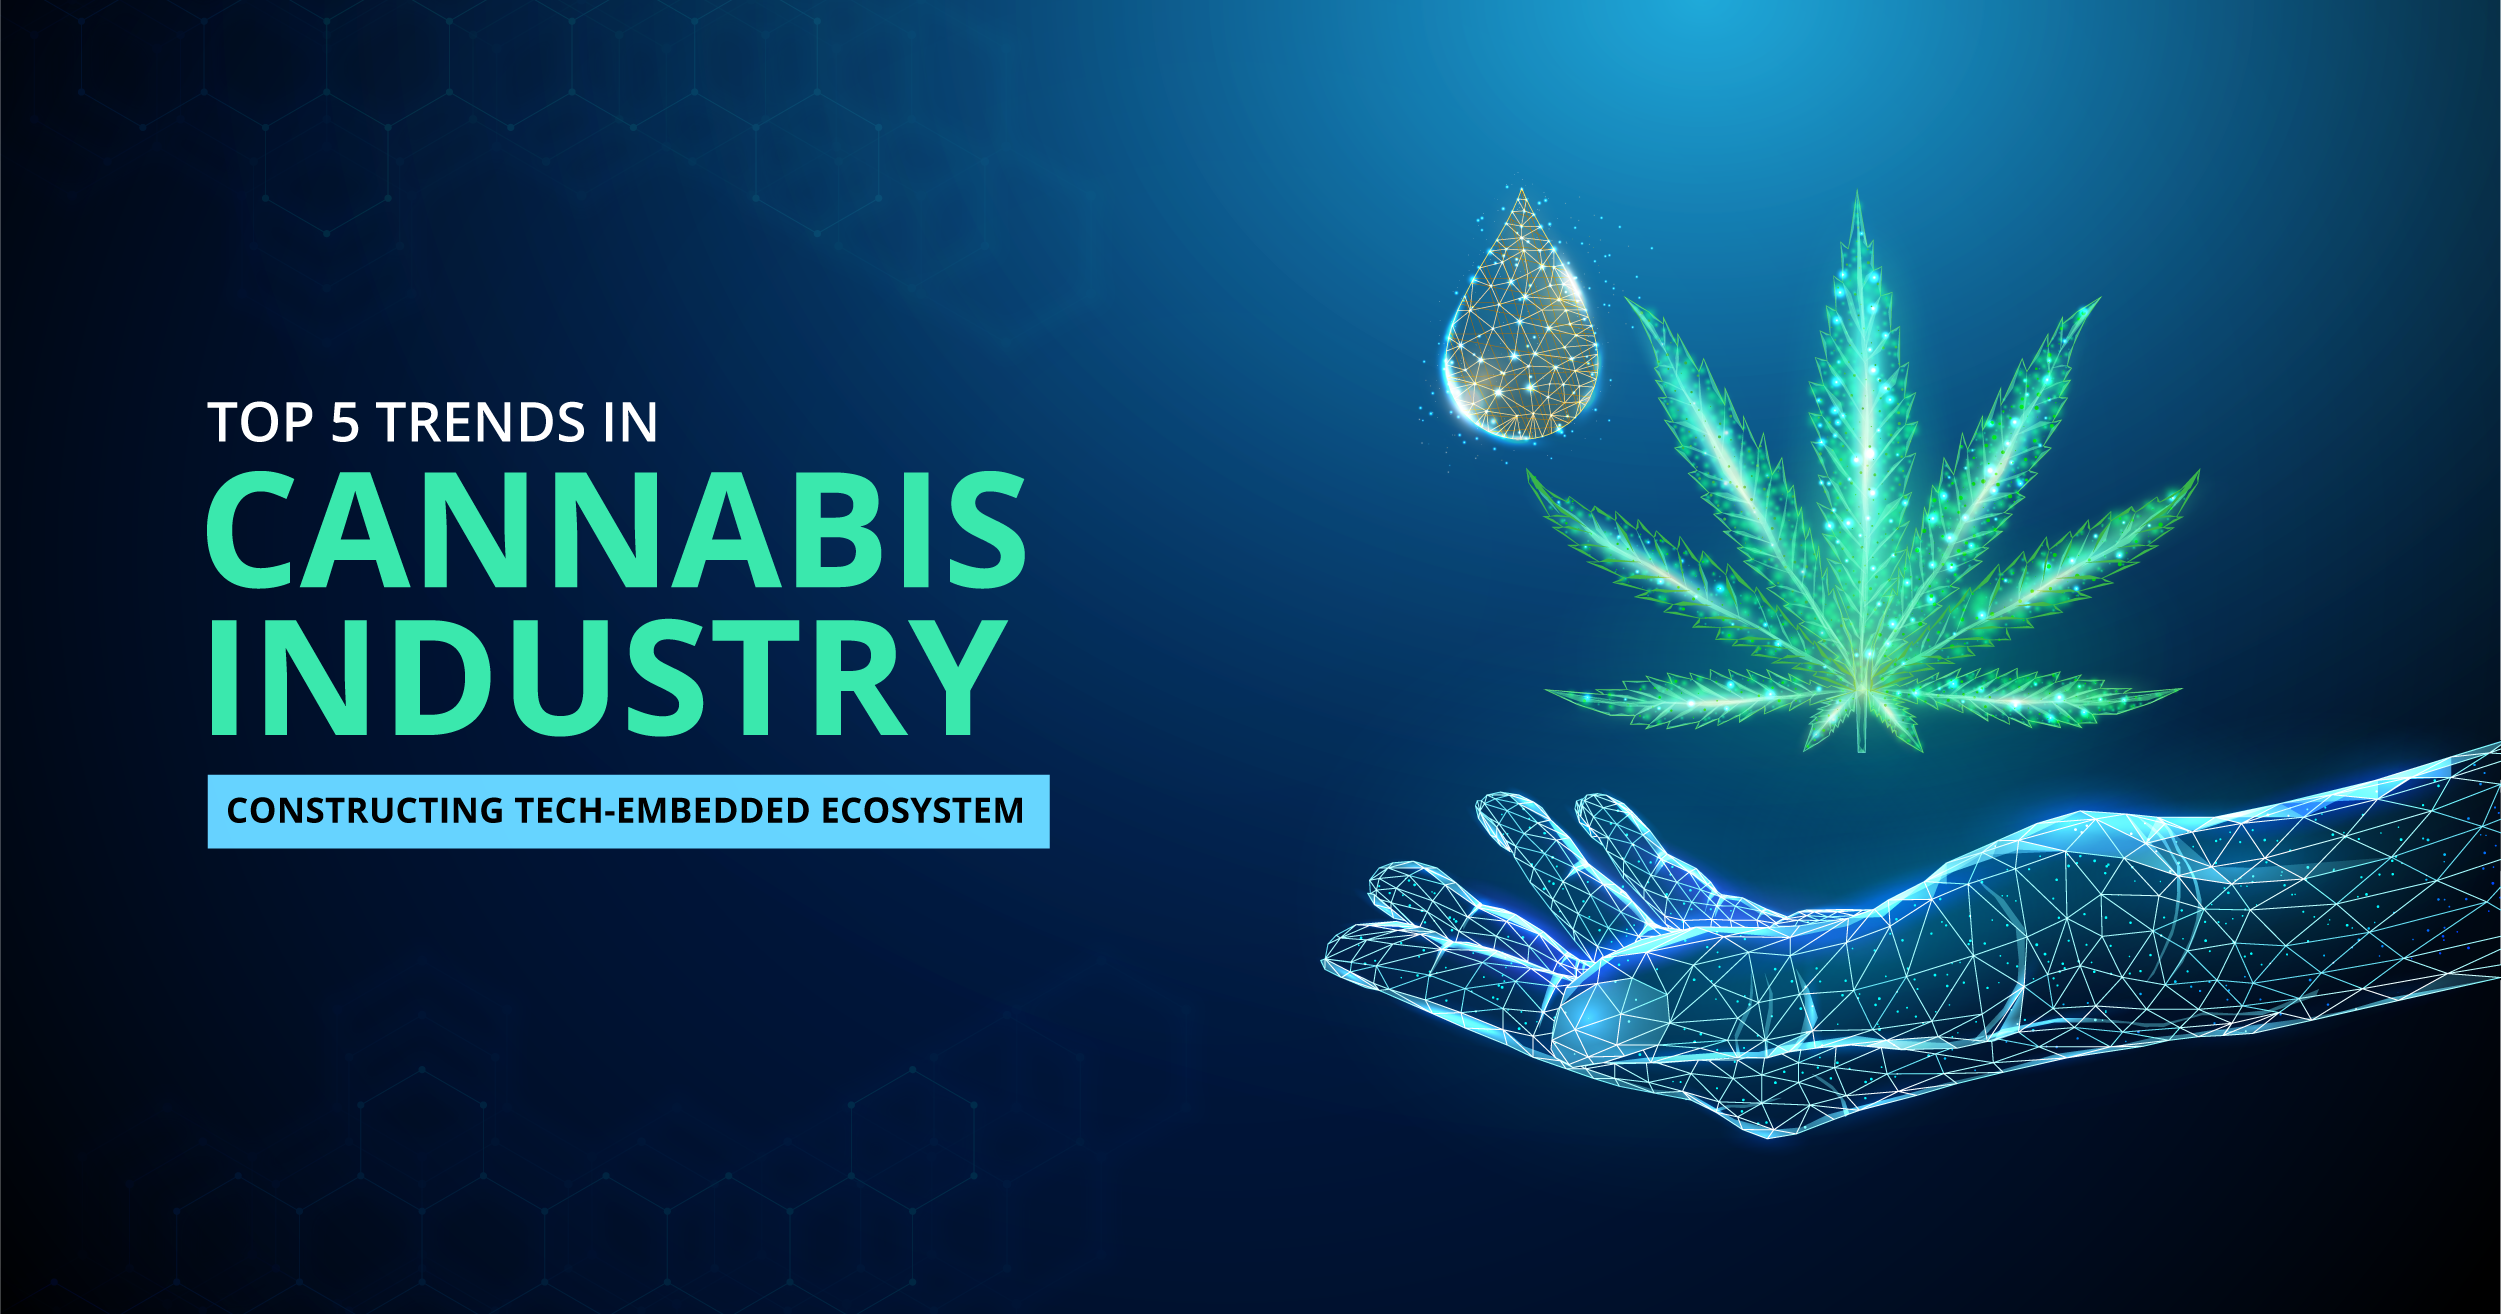 Top 5 Trends in Cannabis Industry Constructing Tech-Embedded Ecosystem